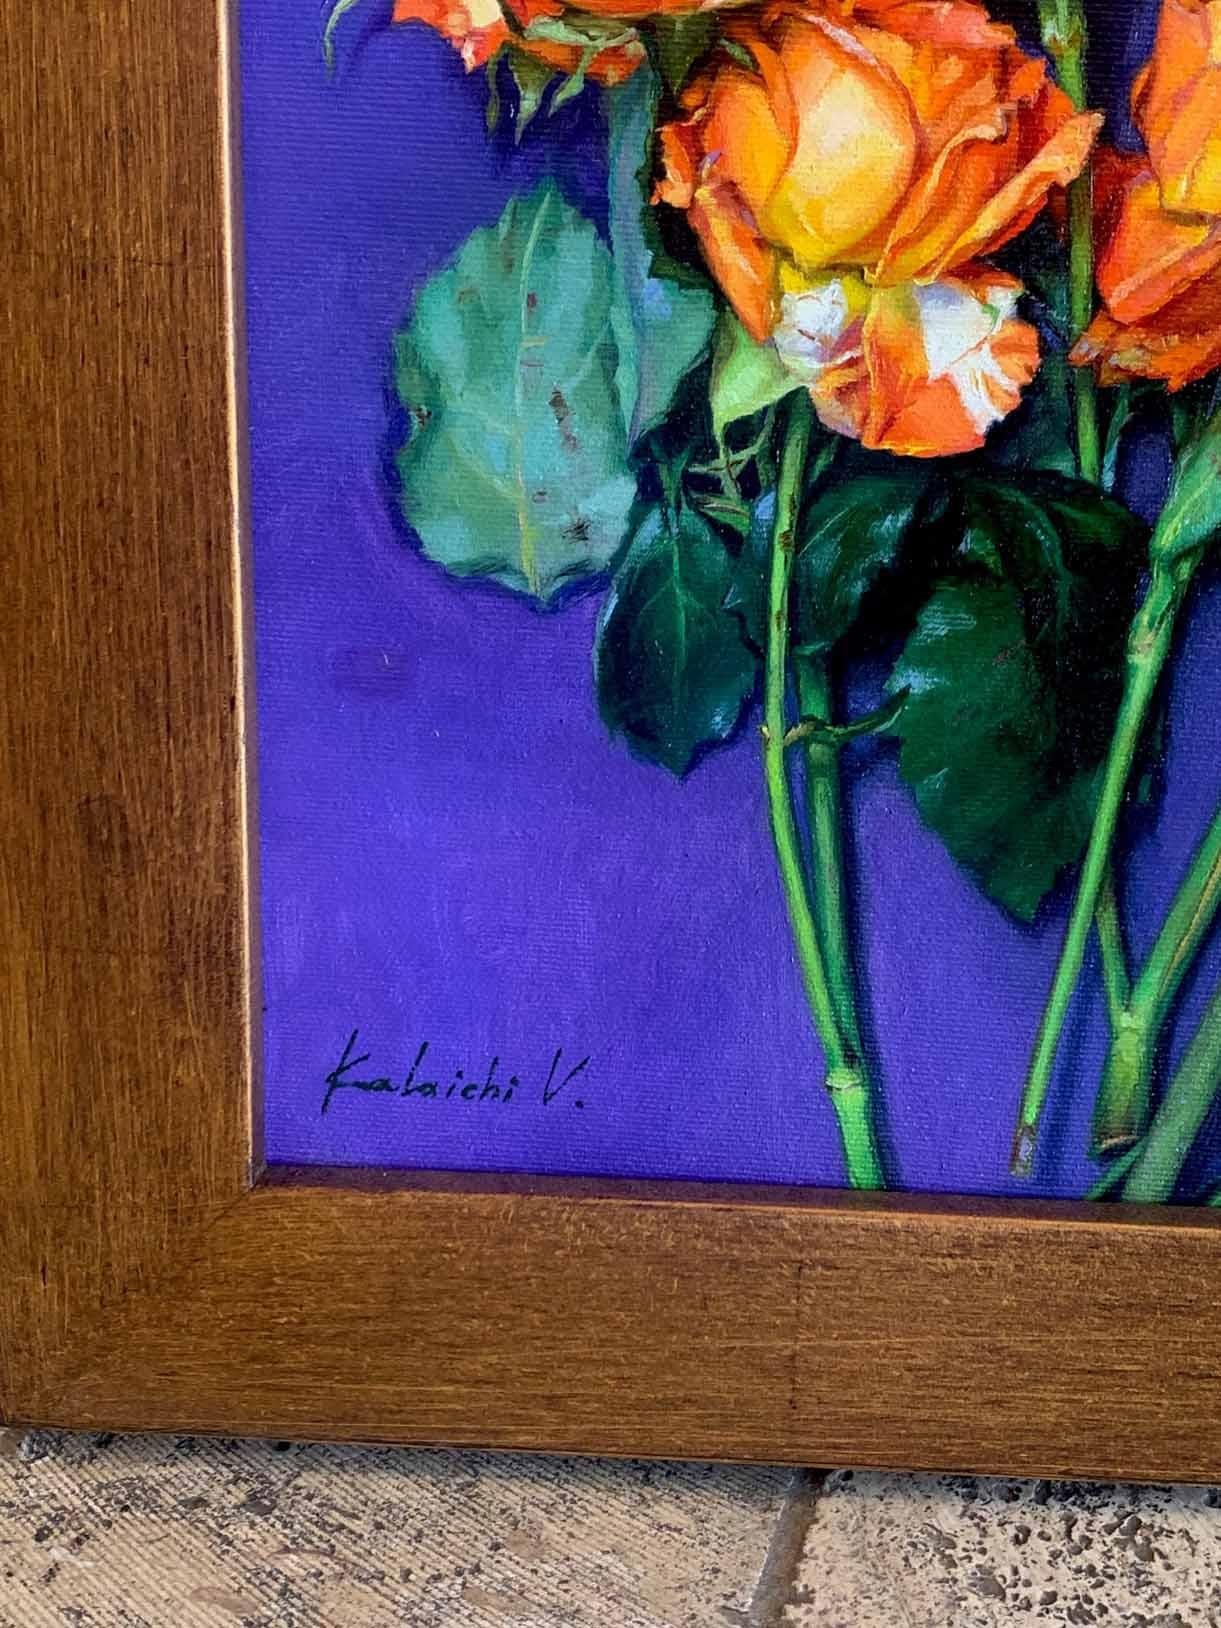 Summer Flowers - Realist Painting by Victoria Kalaichi